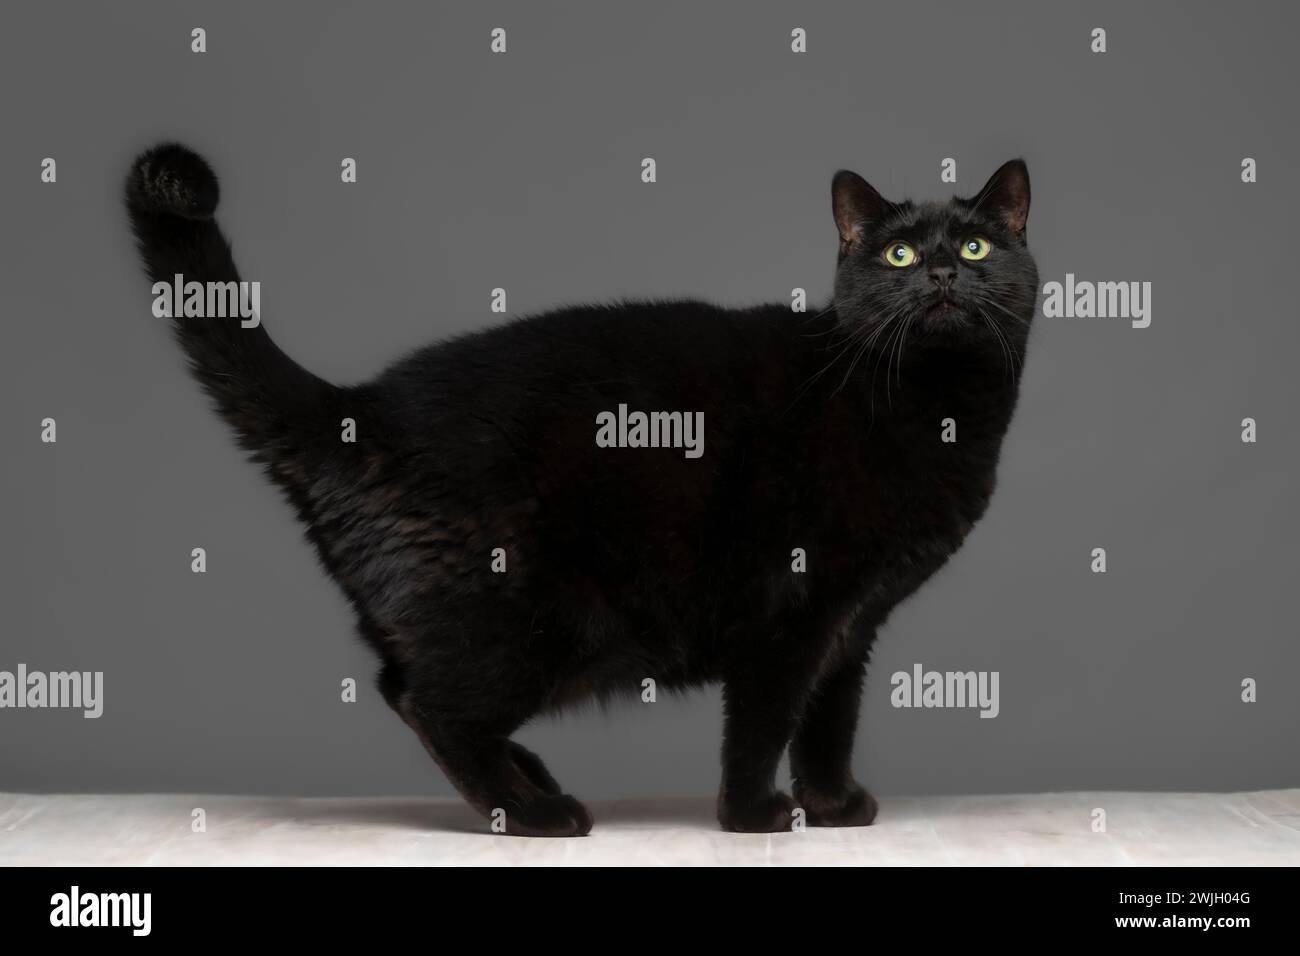 Studio shot of an adult short-haired black cat standing side on to the camera against a grey background. Stock Photo